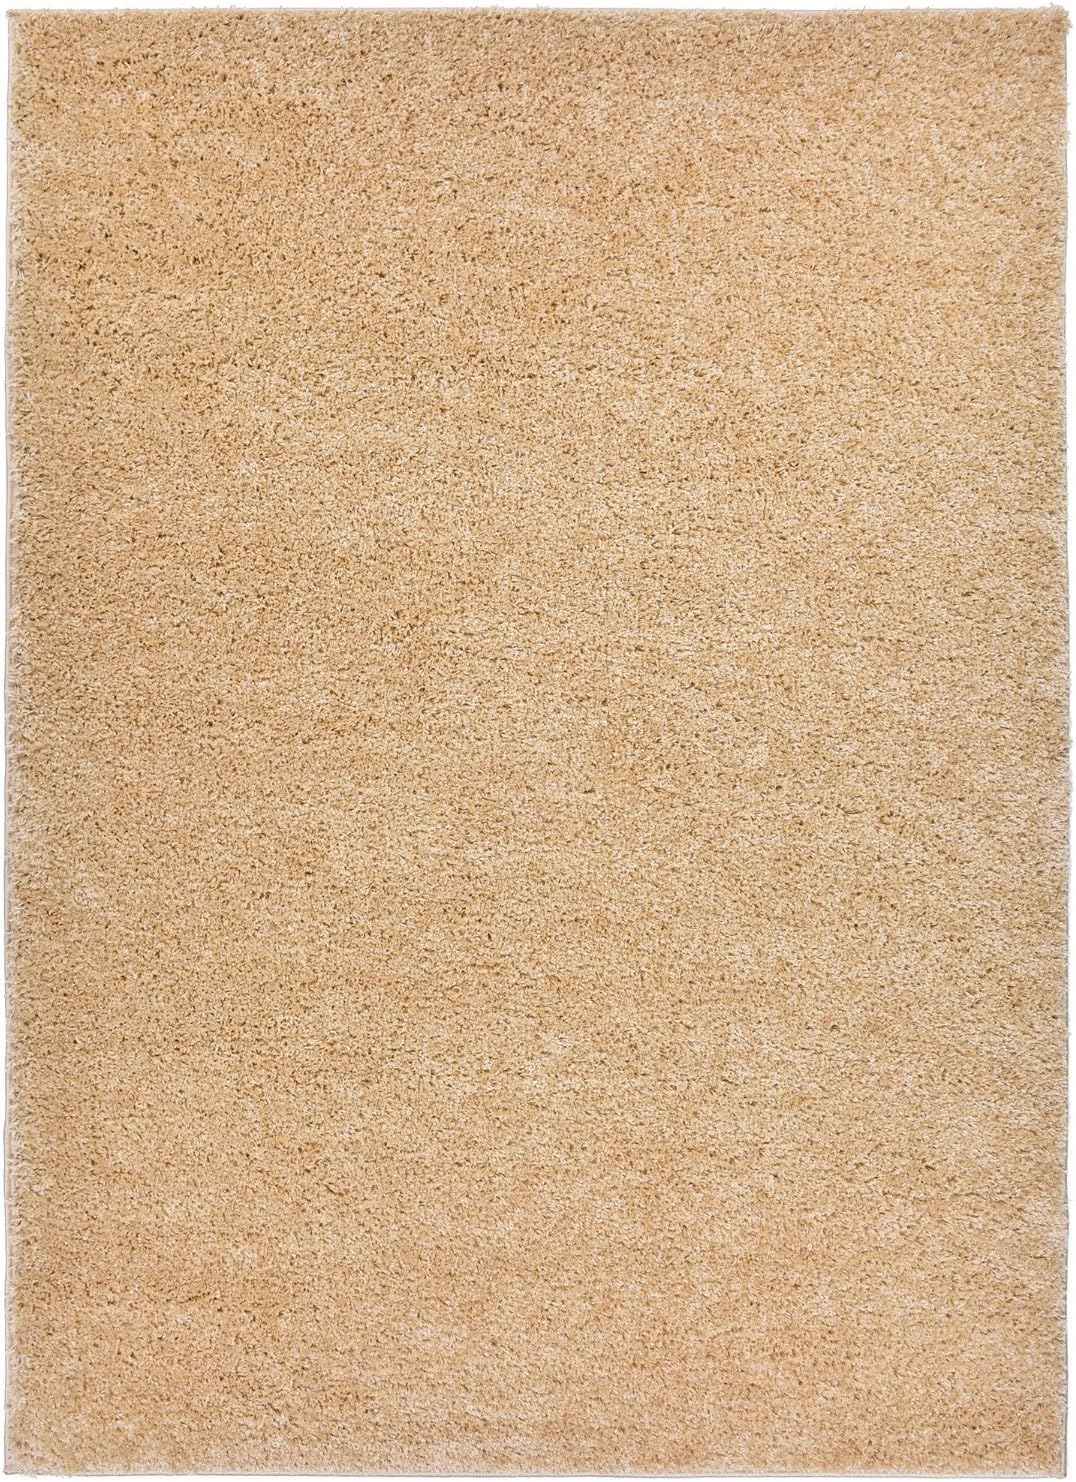 SOHO Shaggy Collection Solid Color Shag Area Rug (Beige, 8 x 10)